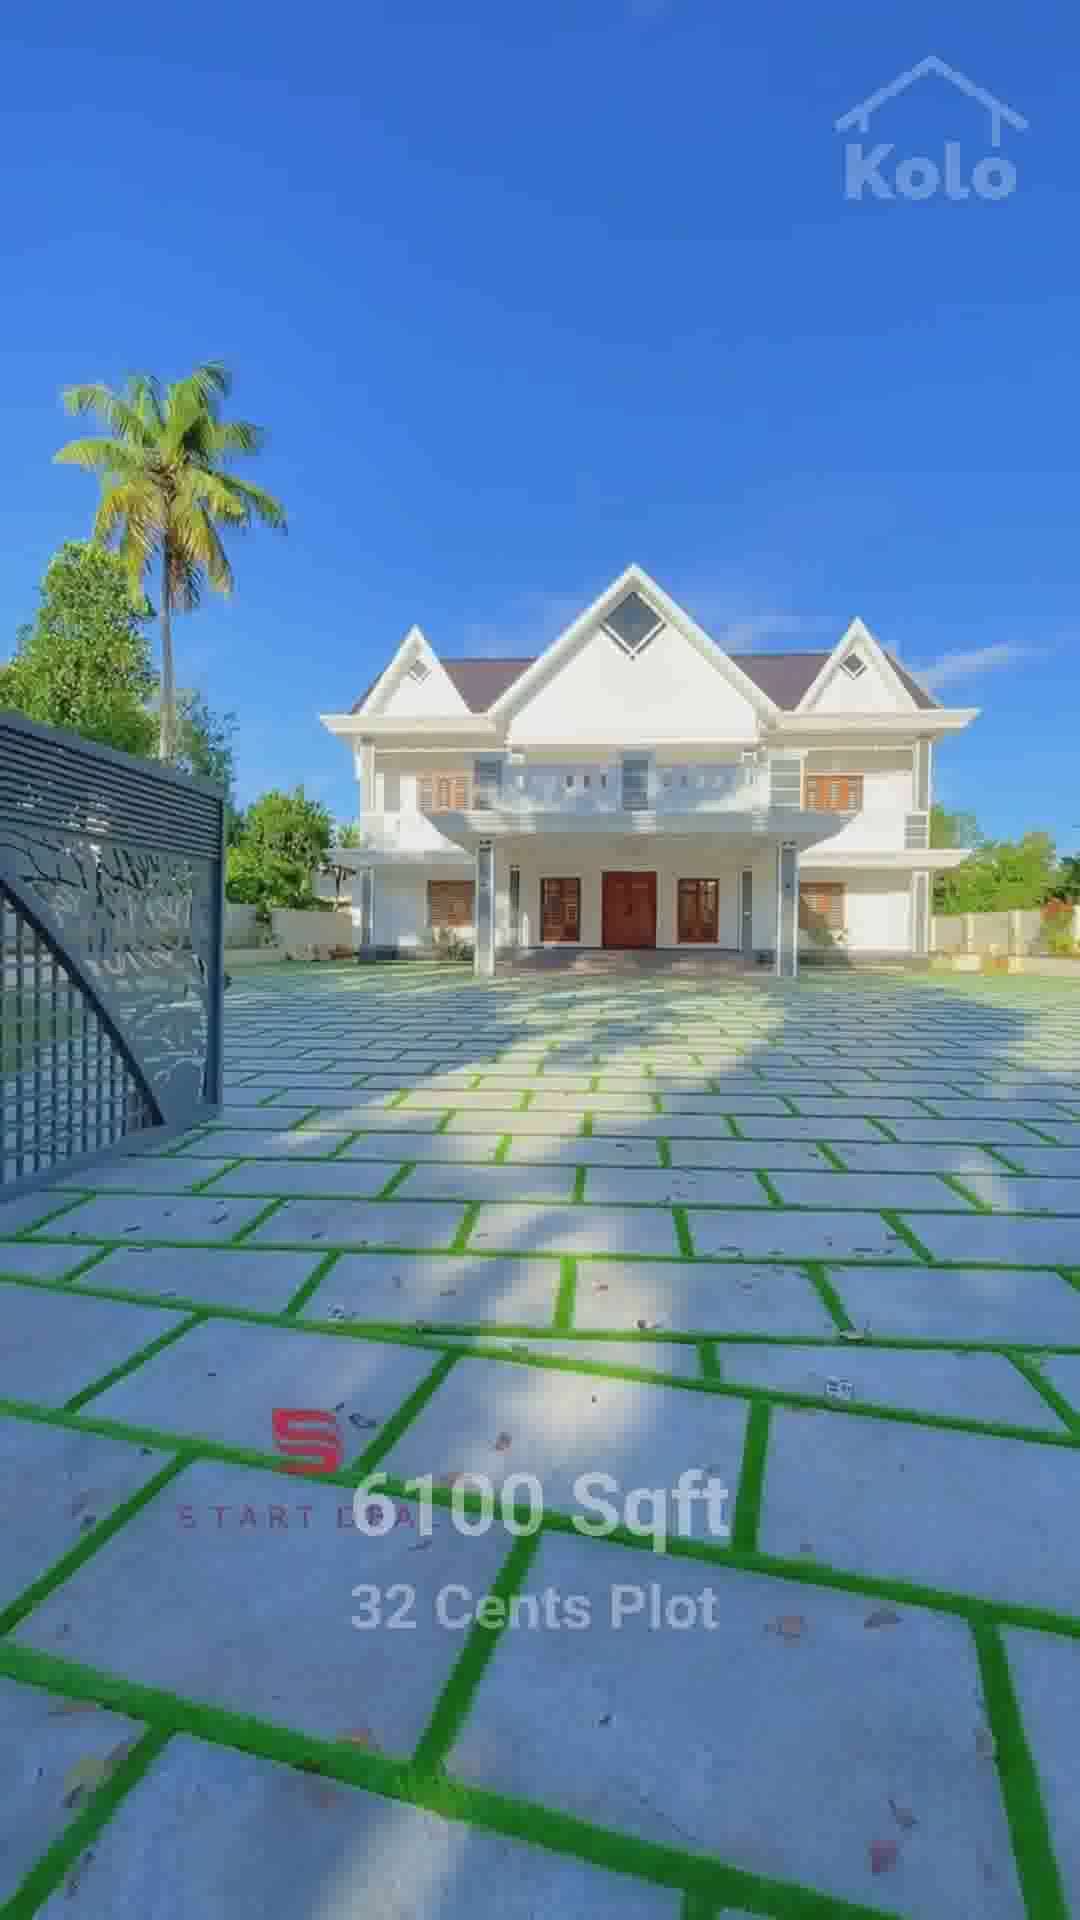 6100 Sqft | Cochin

Plot Area: 32 Cents
Built in Area: 6100 Sqft
BHK 5+1 Home Theater + 1 Pray Room
Location: Near Cochin International Airport
For more details: Call :telephone_receiver: 9072131728

Kolo - India’s Largest Home Construction Community :house:

#residence #home #residentialdesign #keralahome #architecture #arch #archidaily #architecturelovers #archviz #koloapp #design #designkerala #designindia #tropical #tropical #dezeen #buildofy #tropicalspace #designinspiration #contemporaryresidence #keralahomedesignz #kerala #keralainteriordesingz #keralatraditionalarchitecture #housedesign #architectureporn #archidgestindia #arch